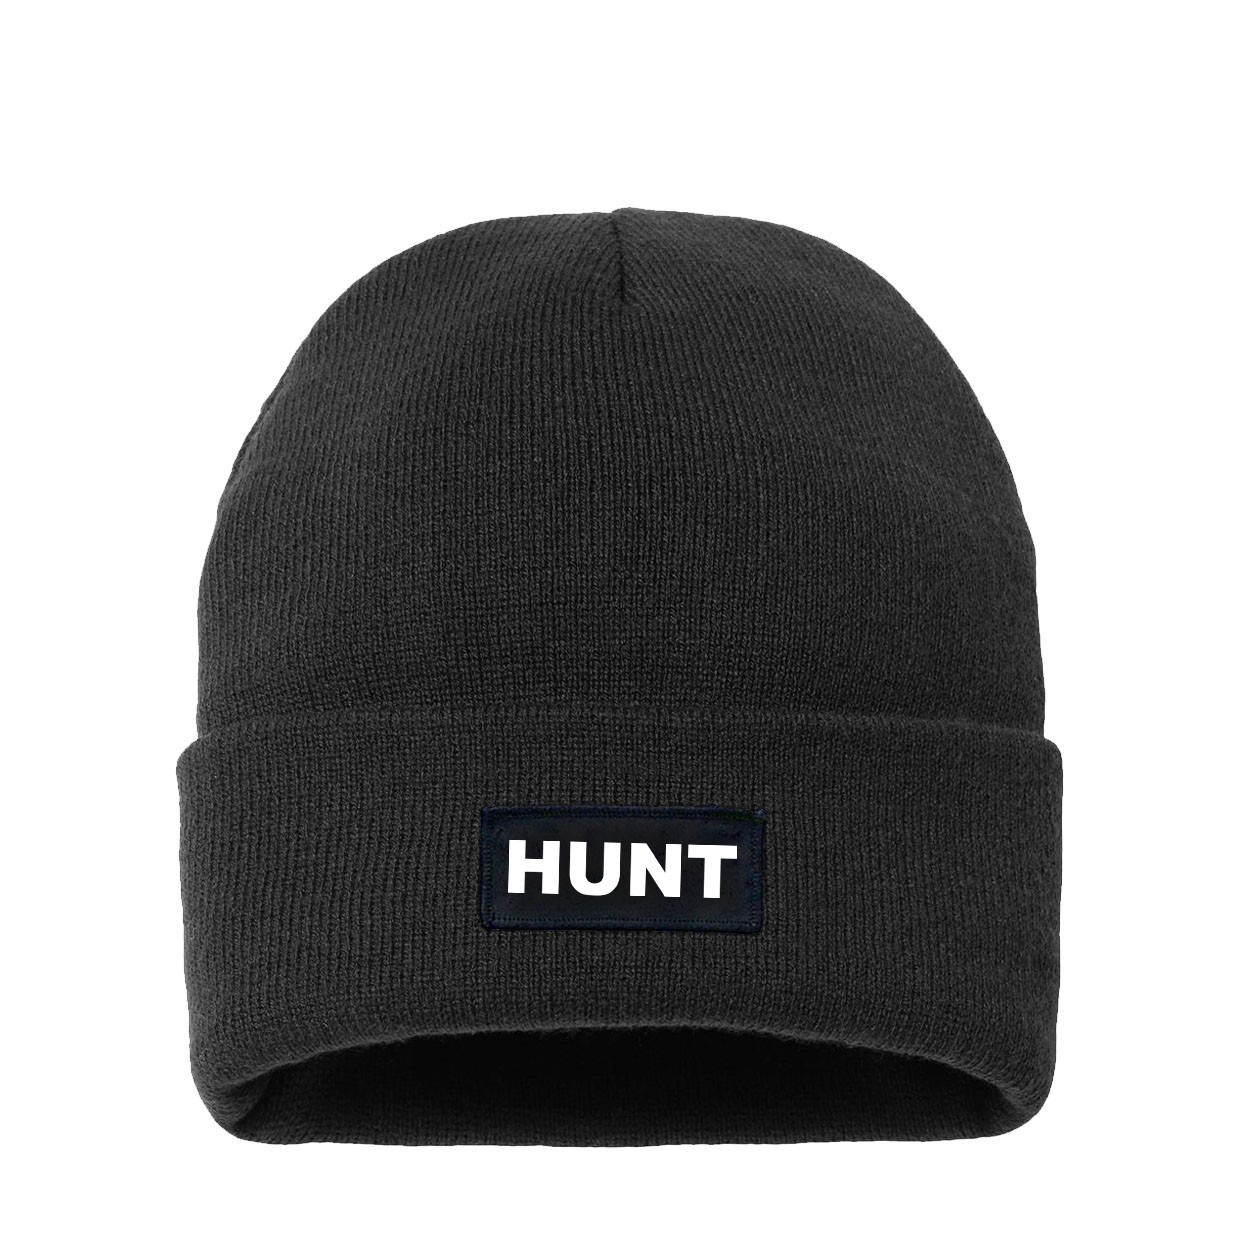 Hunt Brand Logo Night Out Woven Patch Night Out Sherpa Lined Cuffed Beanie Black (White Logo)